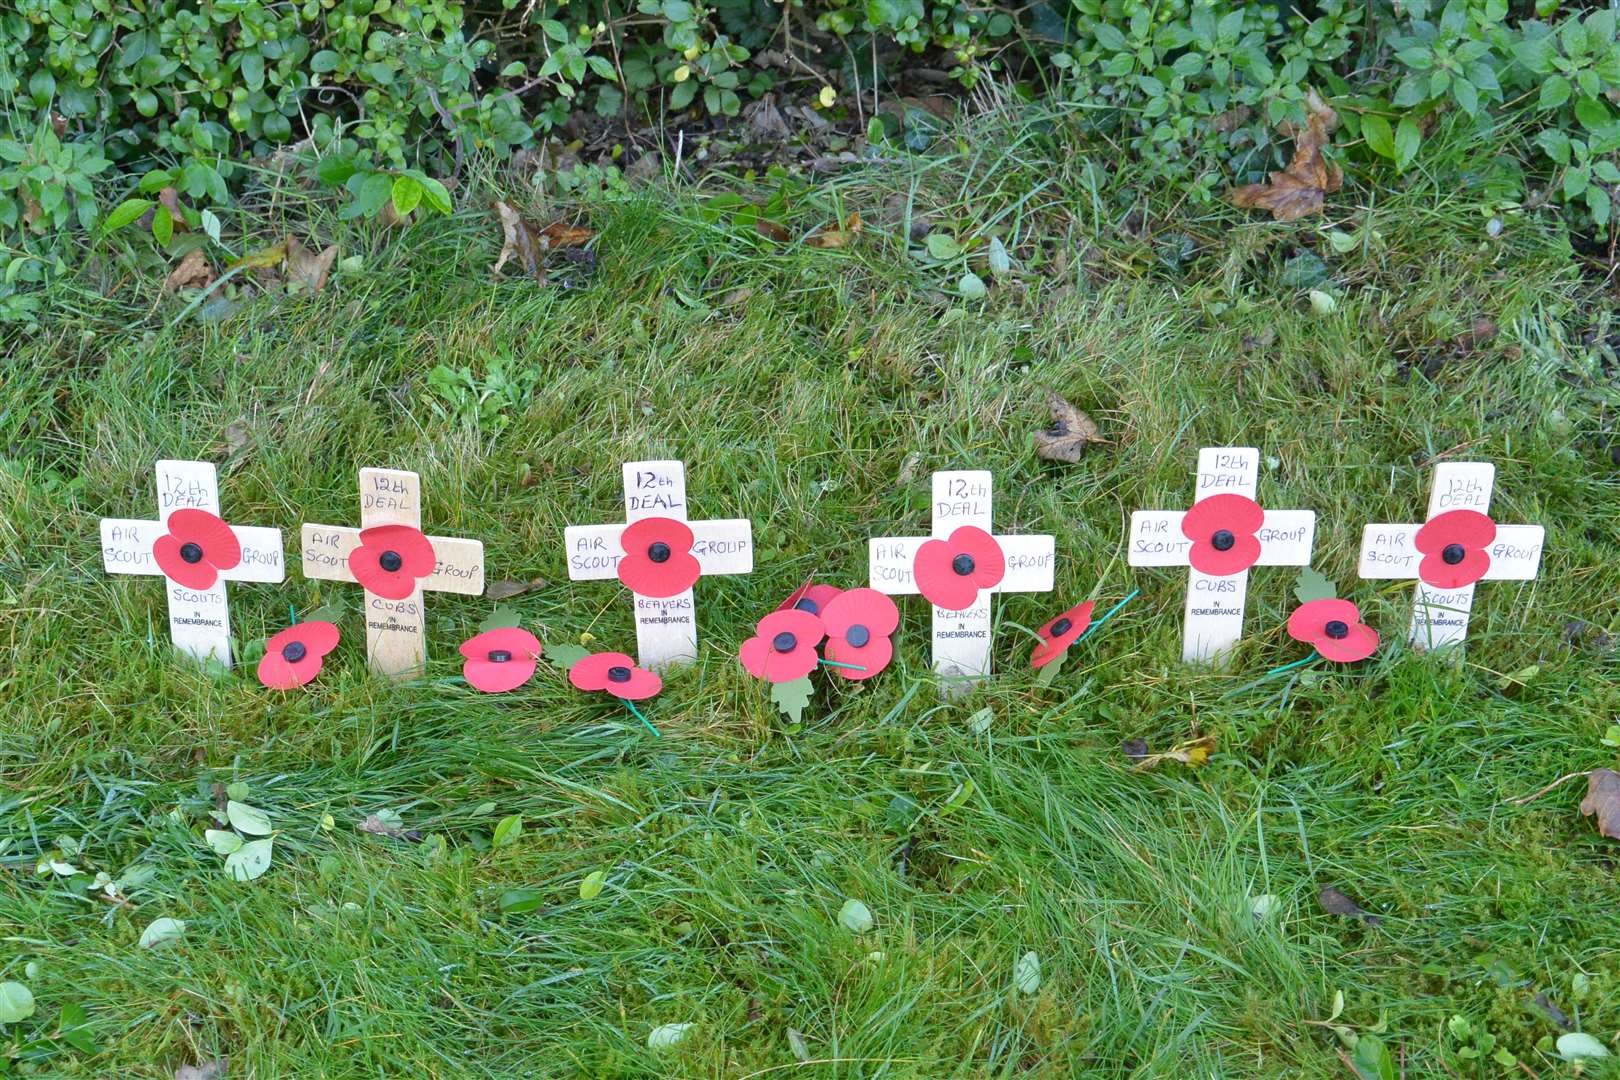 Poppy crosses were placed around the church grounds at Kingsdown on behalf of local Cubs, Beavers and Scouts